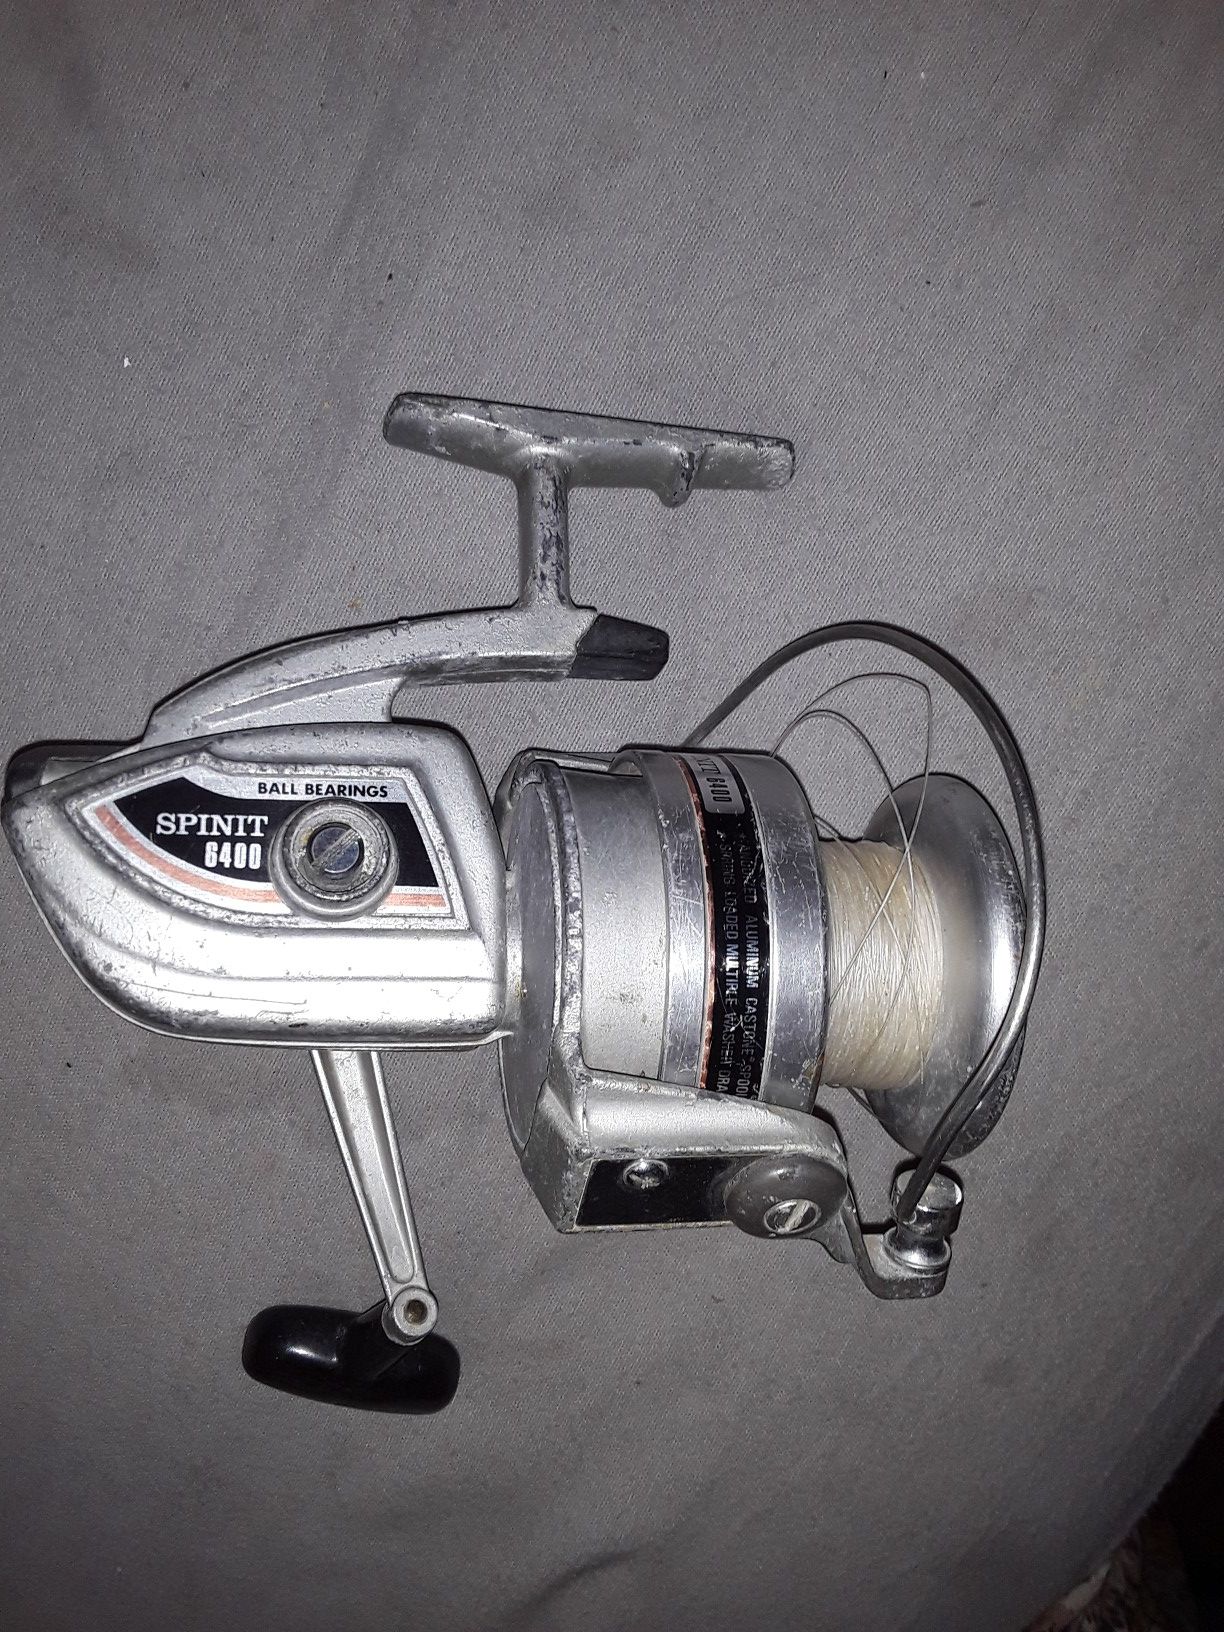 Sprint 6400 Ball Bearings Fishing Reel for Sale in Orick, CA - OfferUp